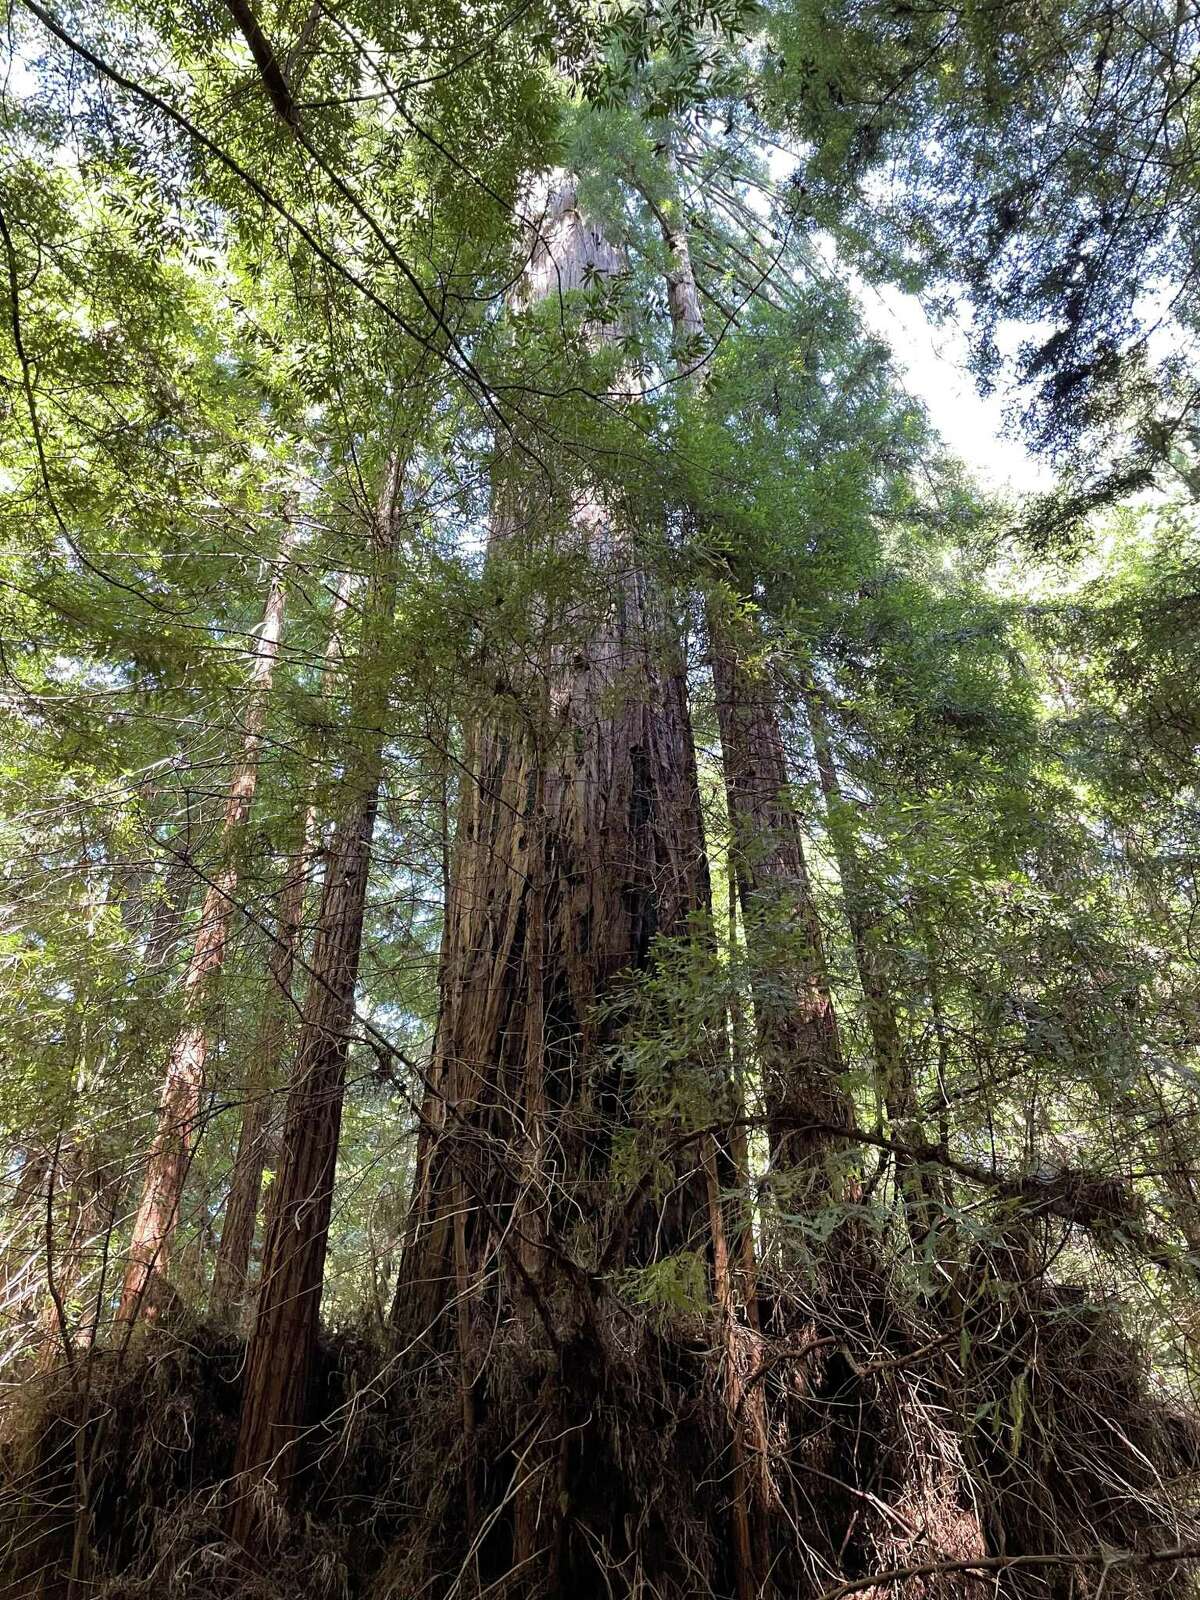 The base of the 340-foot-tall Clar Tree near Guerneville, which is thought to be about 22 feet in diameter.